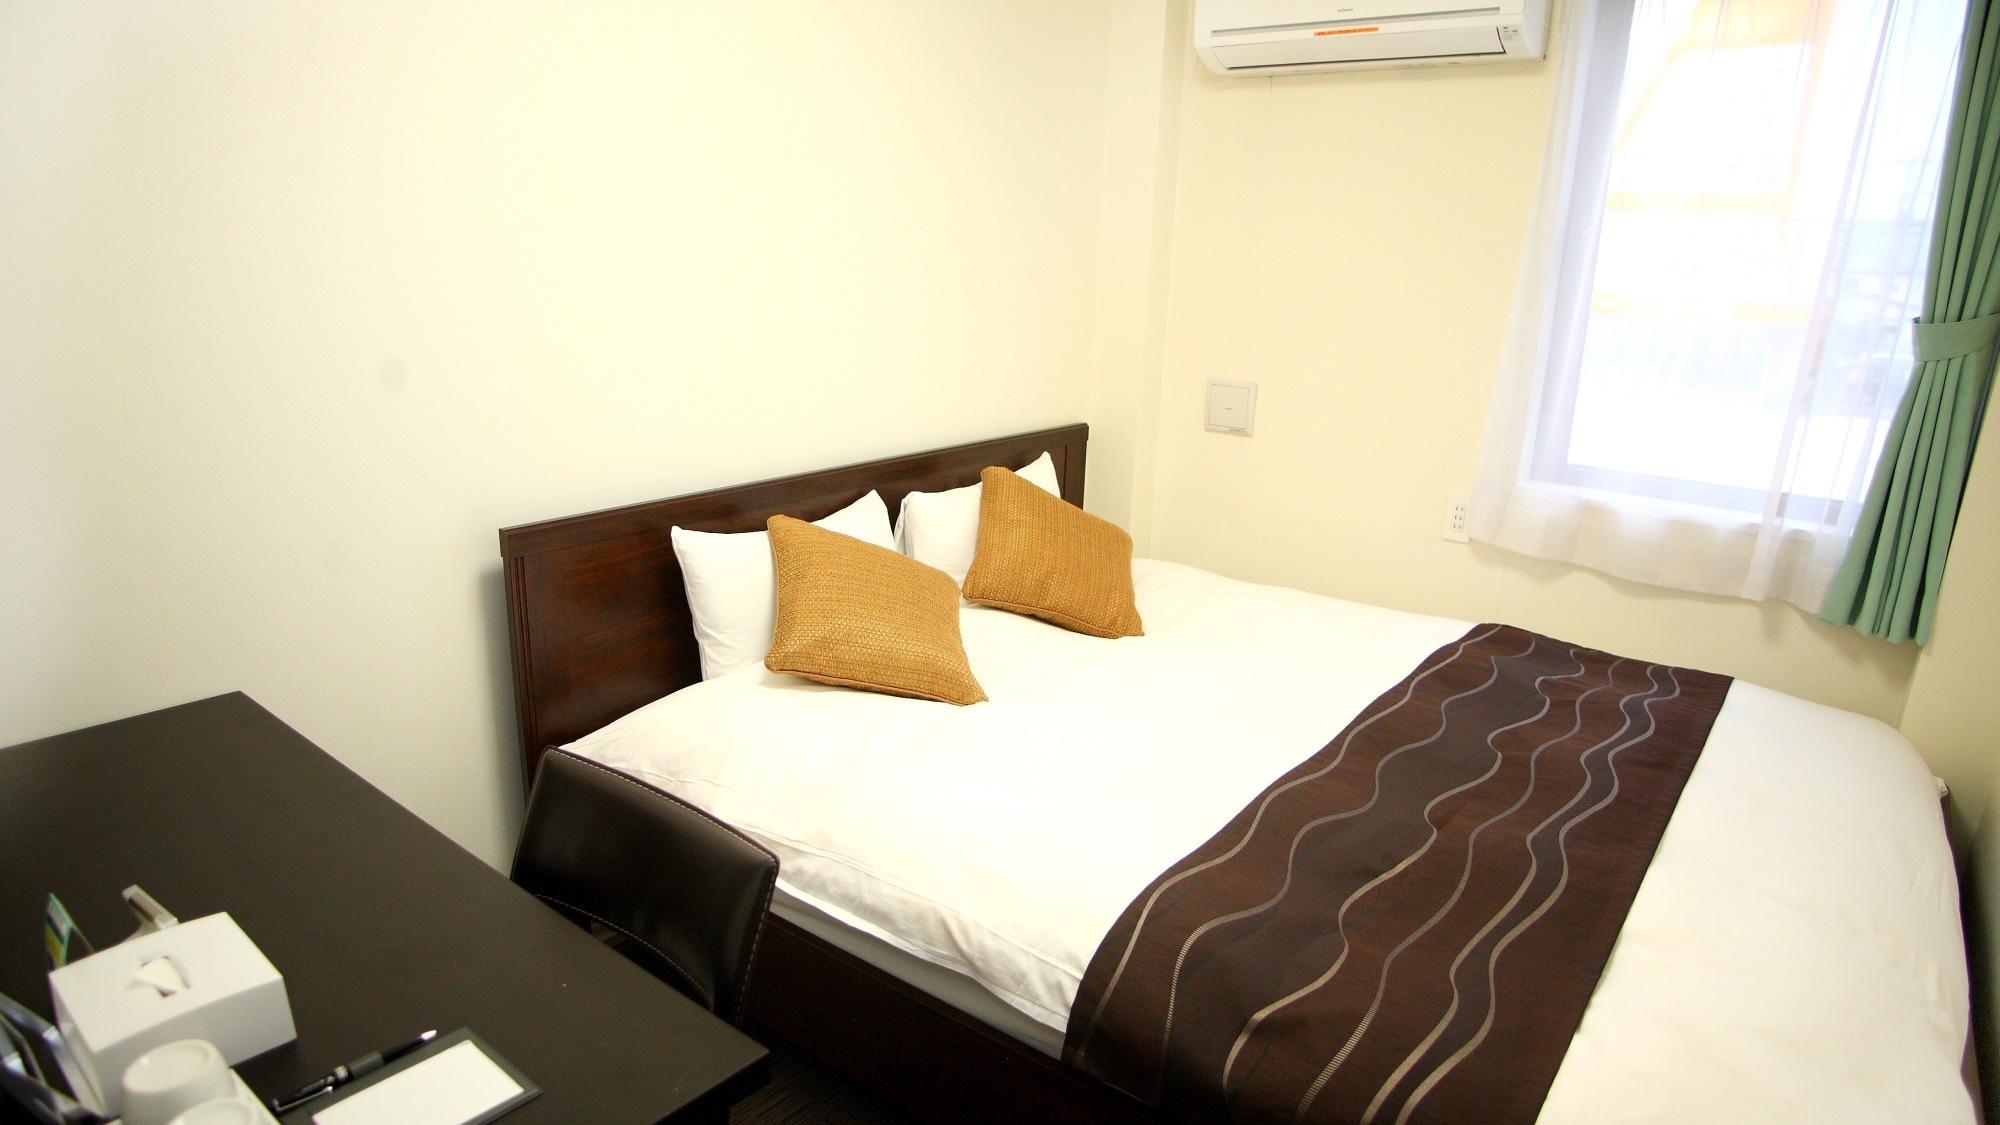 Double room: 11.8 sqm, bed width 140 cm, individual air conditioning, Wi-Fi